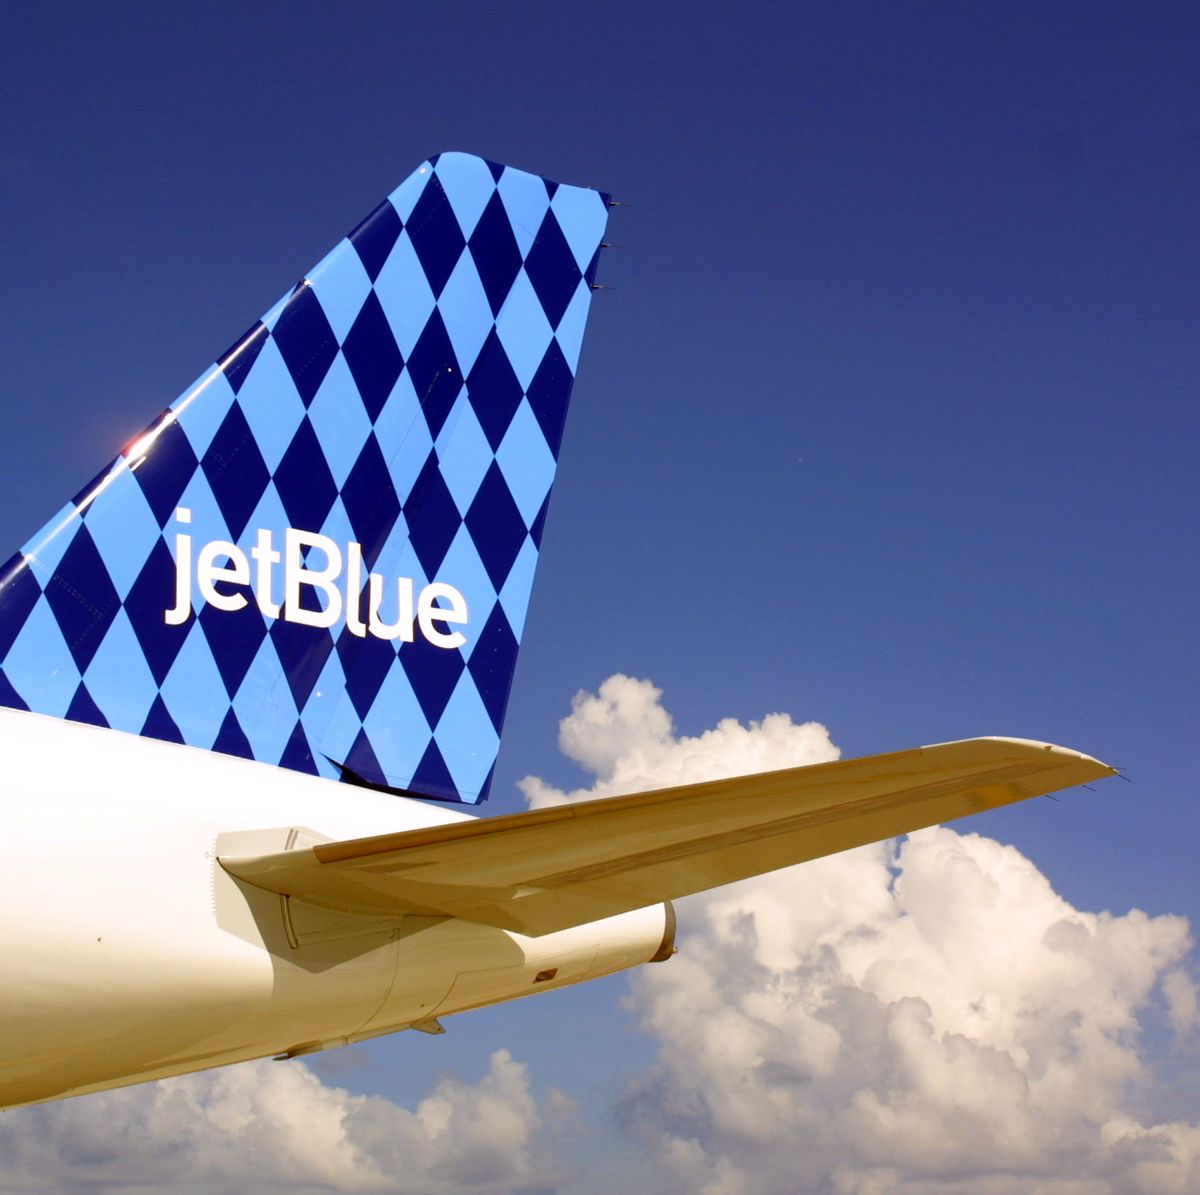 JetBlue Airlines in Ft. Lauderdale, Florida.